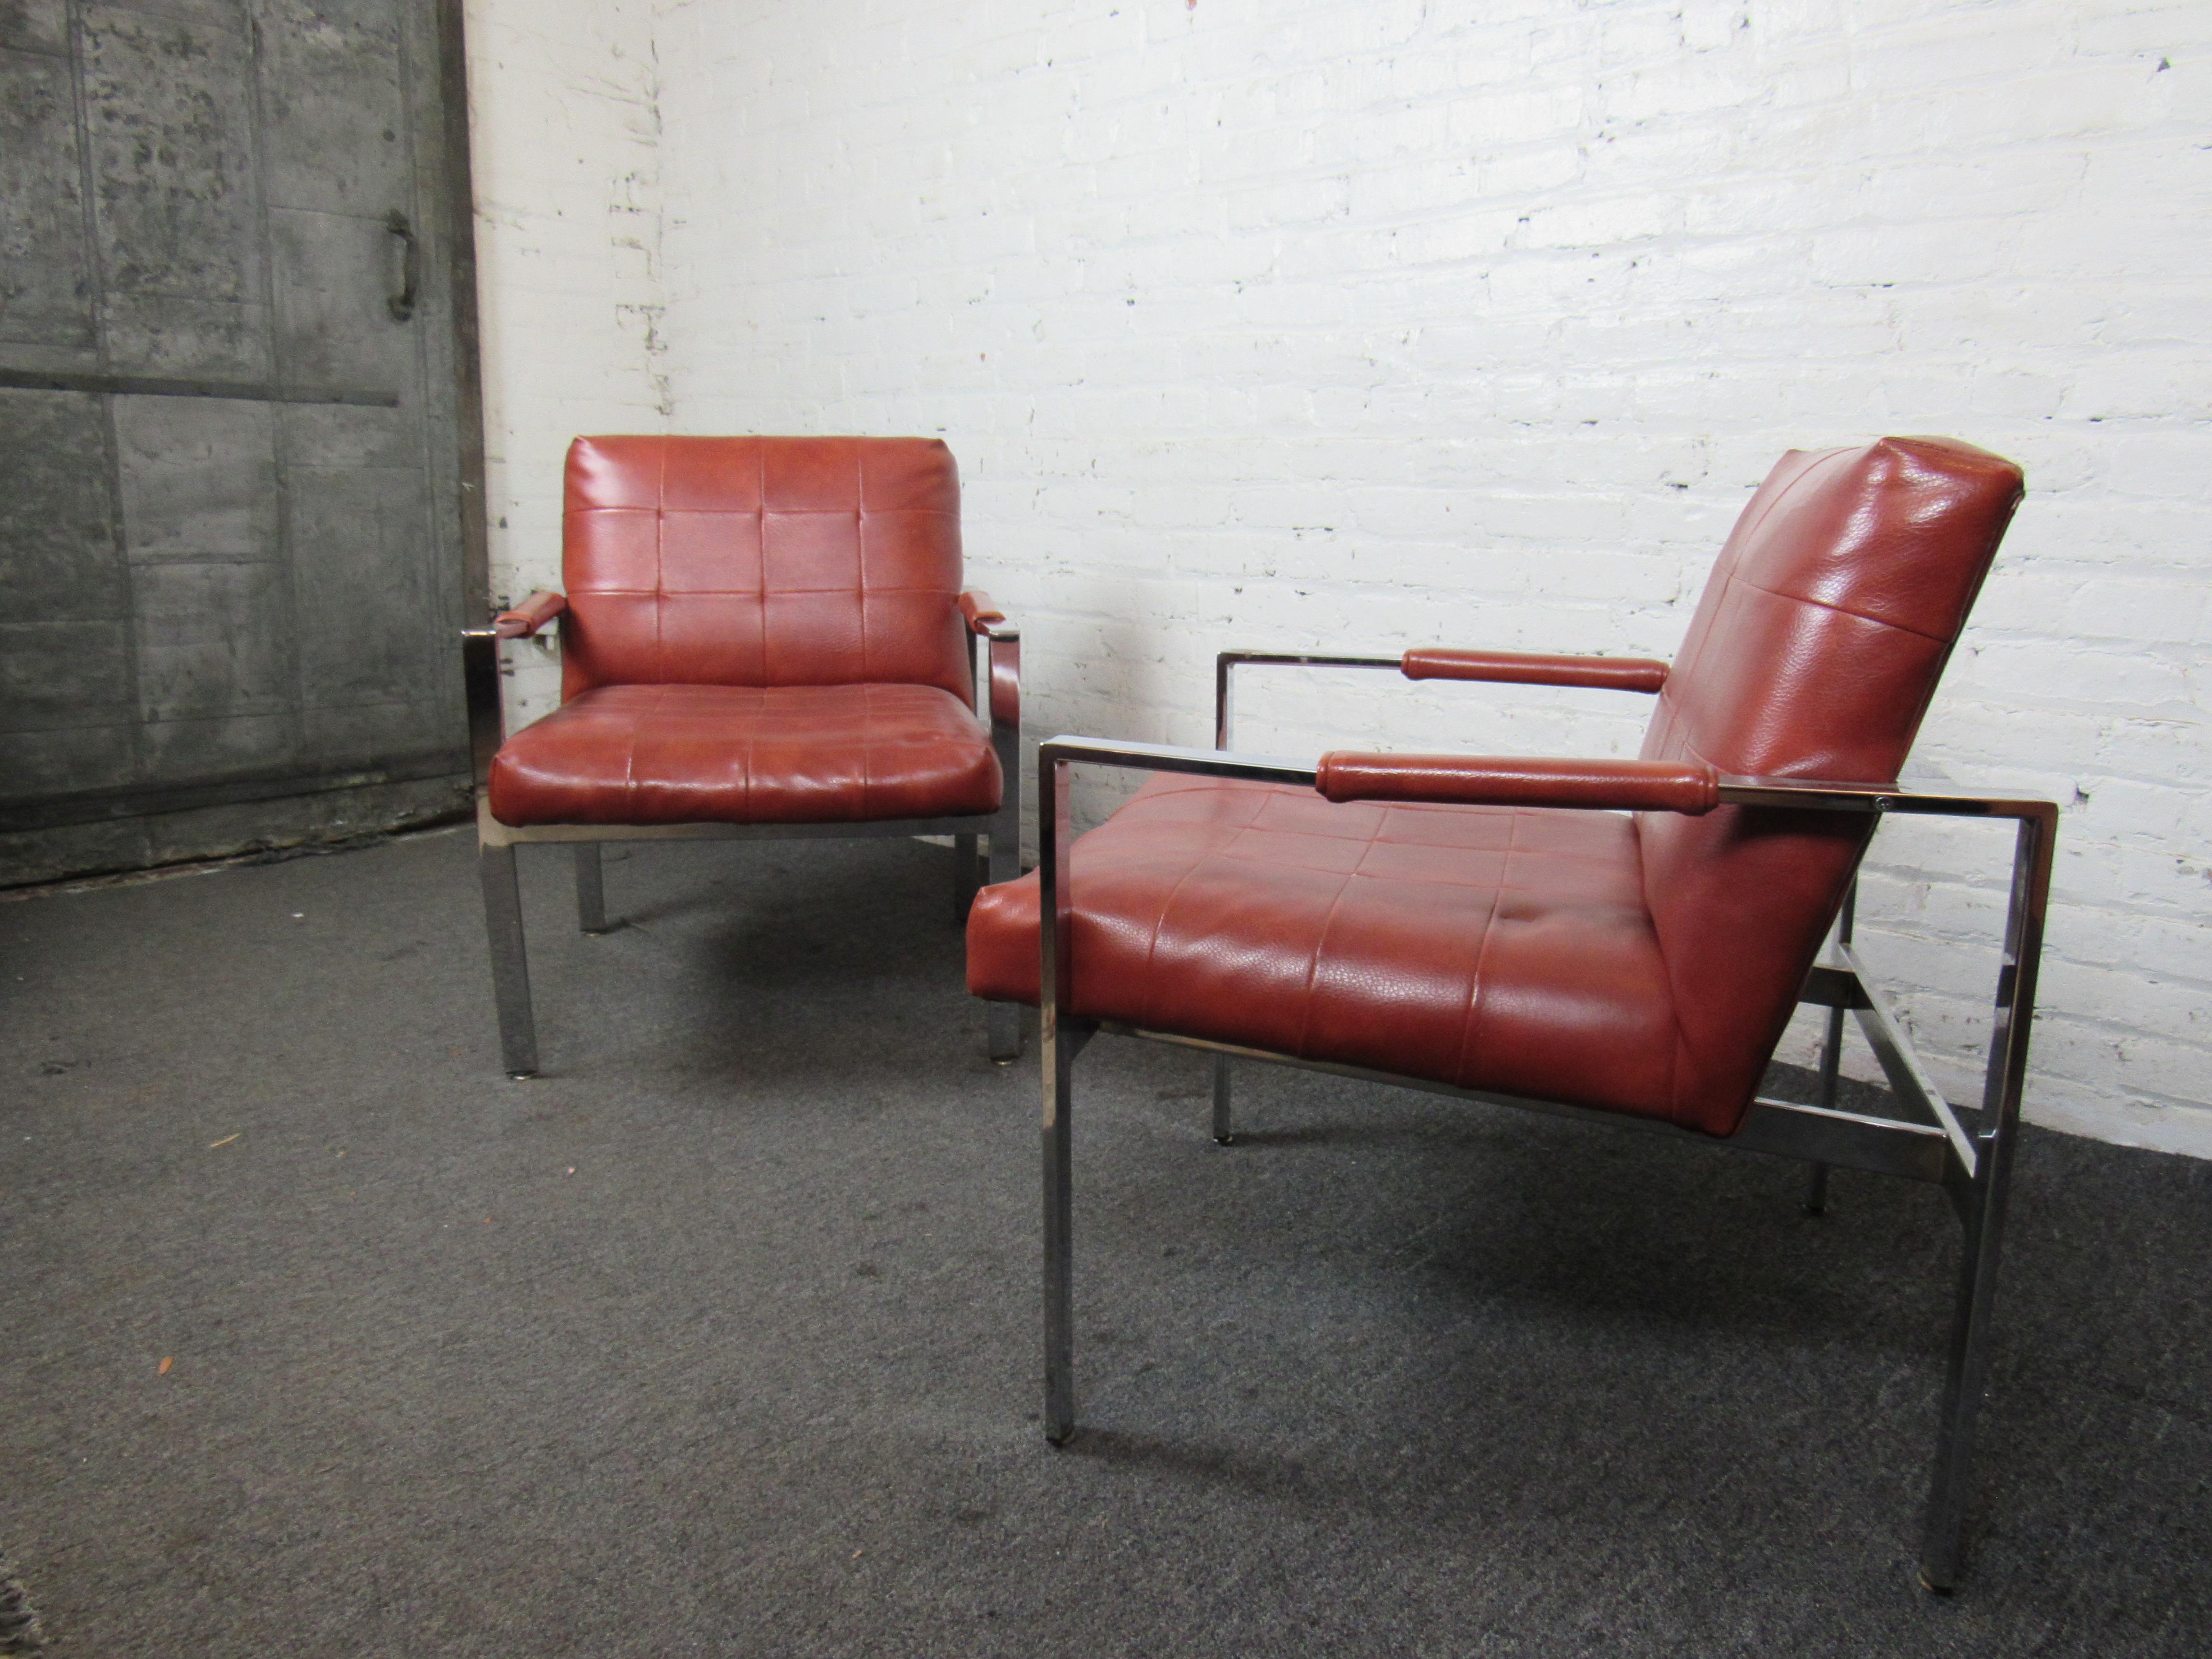 This vintage pair of armchairs combine chrome frames with rich brick-red fabric and a stylish design. Perfect for any office, lobby, or home, this Mid-Century Modern pair is sure to add character and style to any space. 

Please confirm item